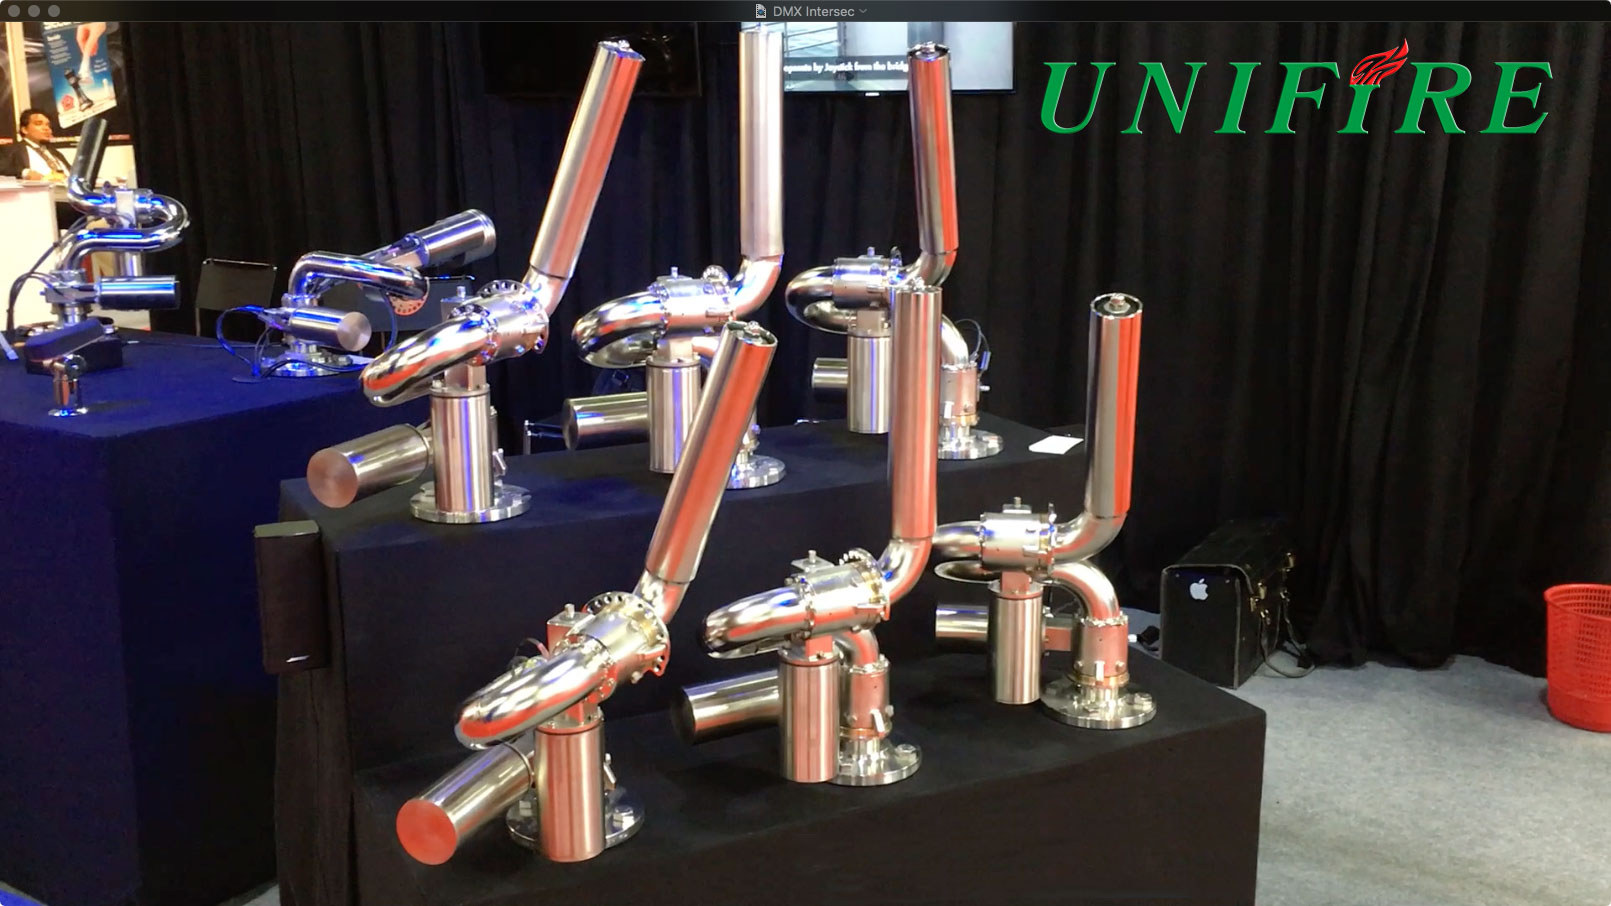 Unifire Exhibits State of the Art Robotic Nozzles at Intersec 2016